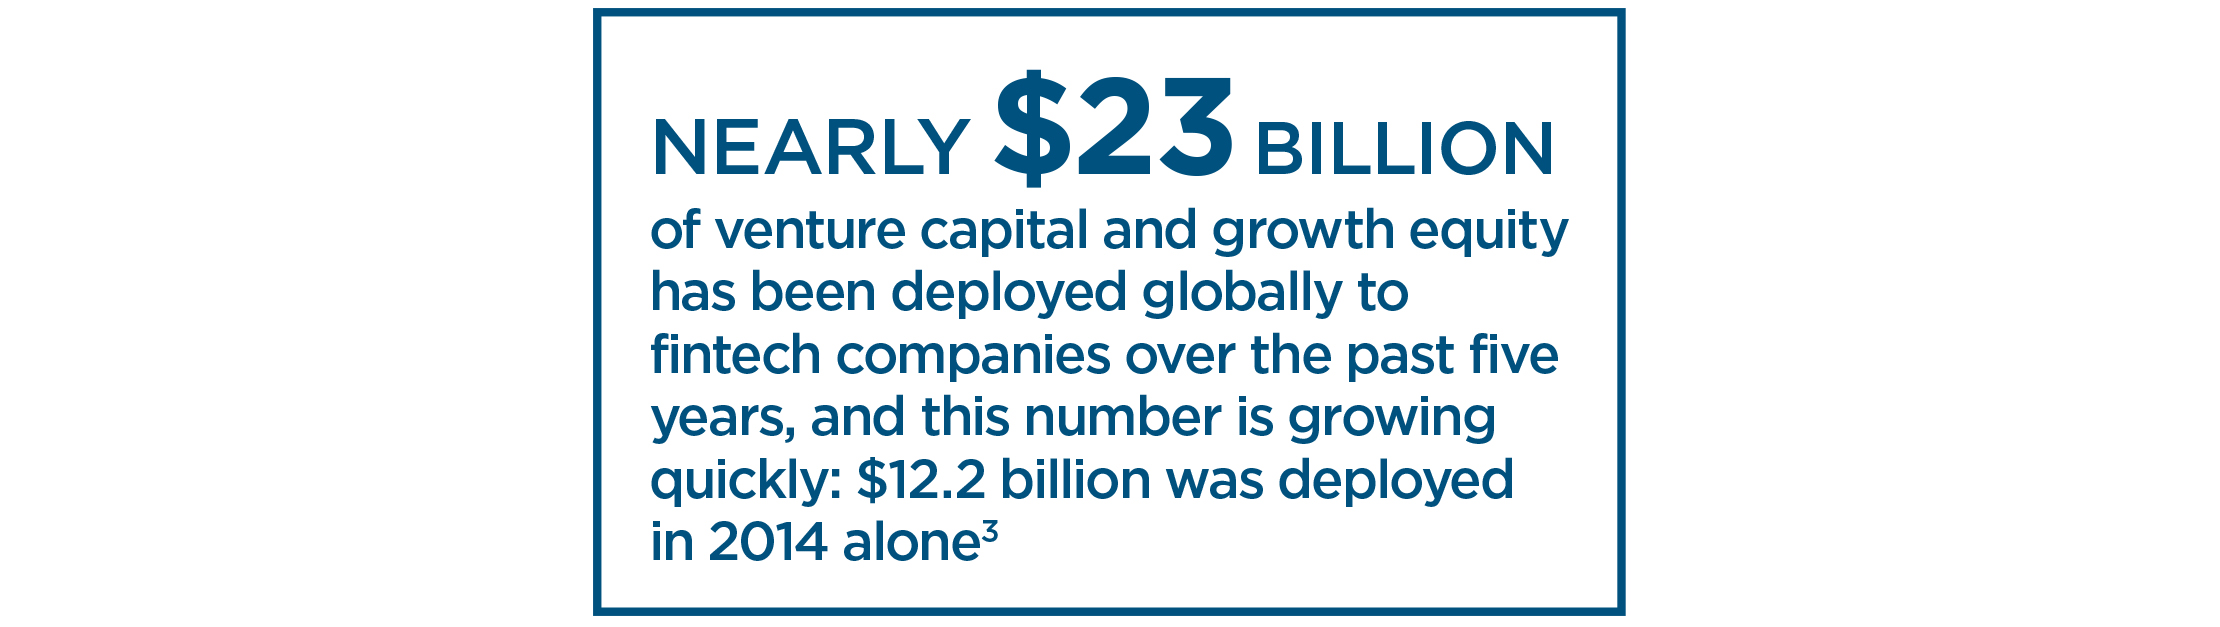 NEARLY $23BILLION of venture capital and growth equity has been deployed globally to fintech companies over the past five years